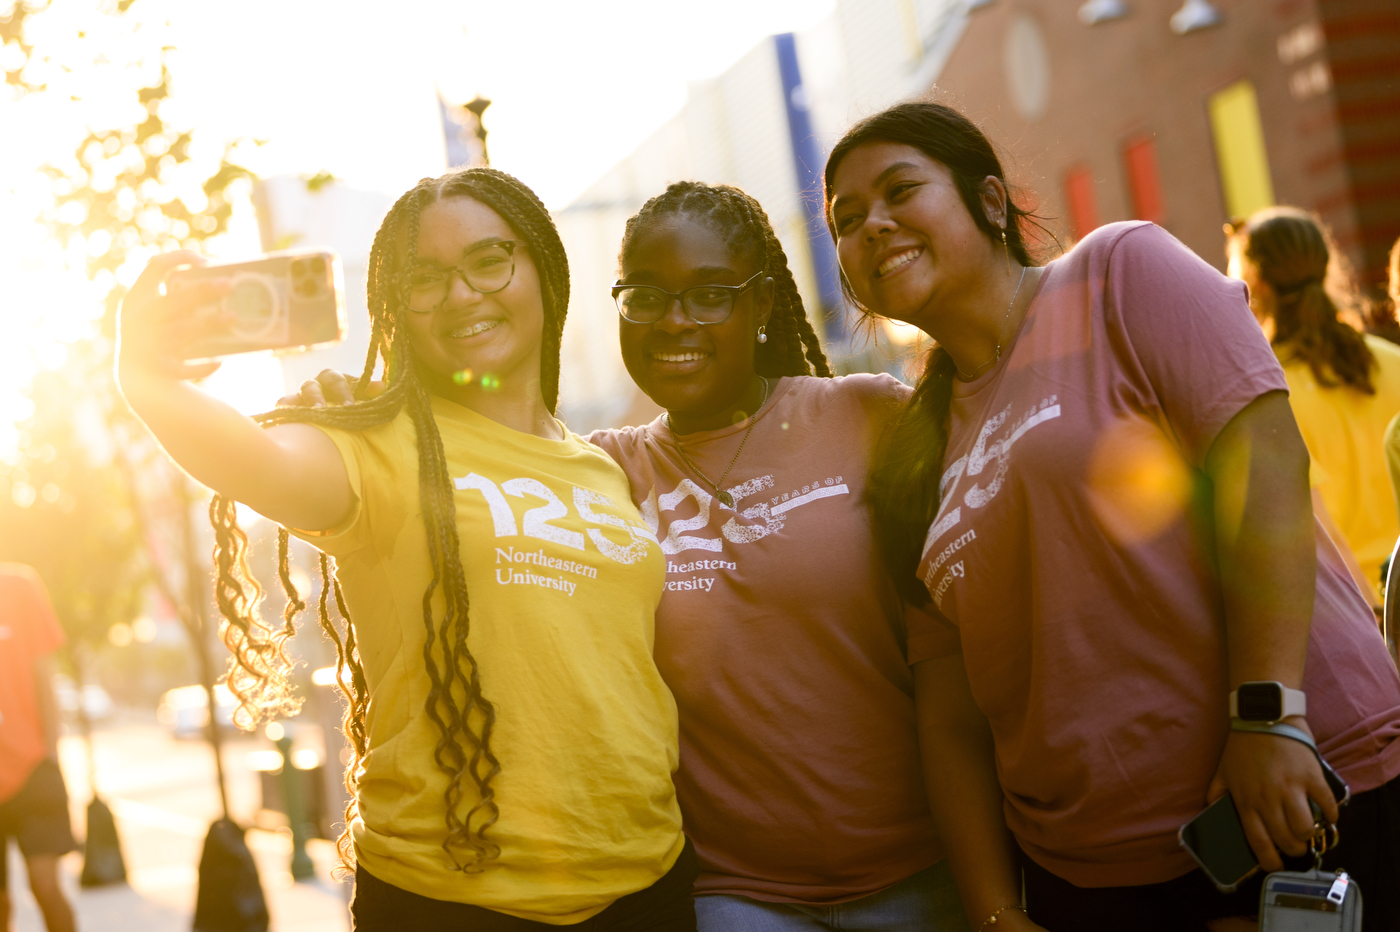 Three students wearing t-shirts that say "125 Northeastern University" smile, while one student takes a selfie with her cellphone.